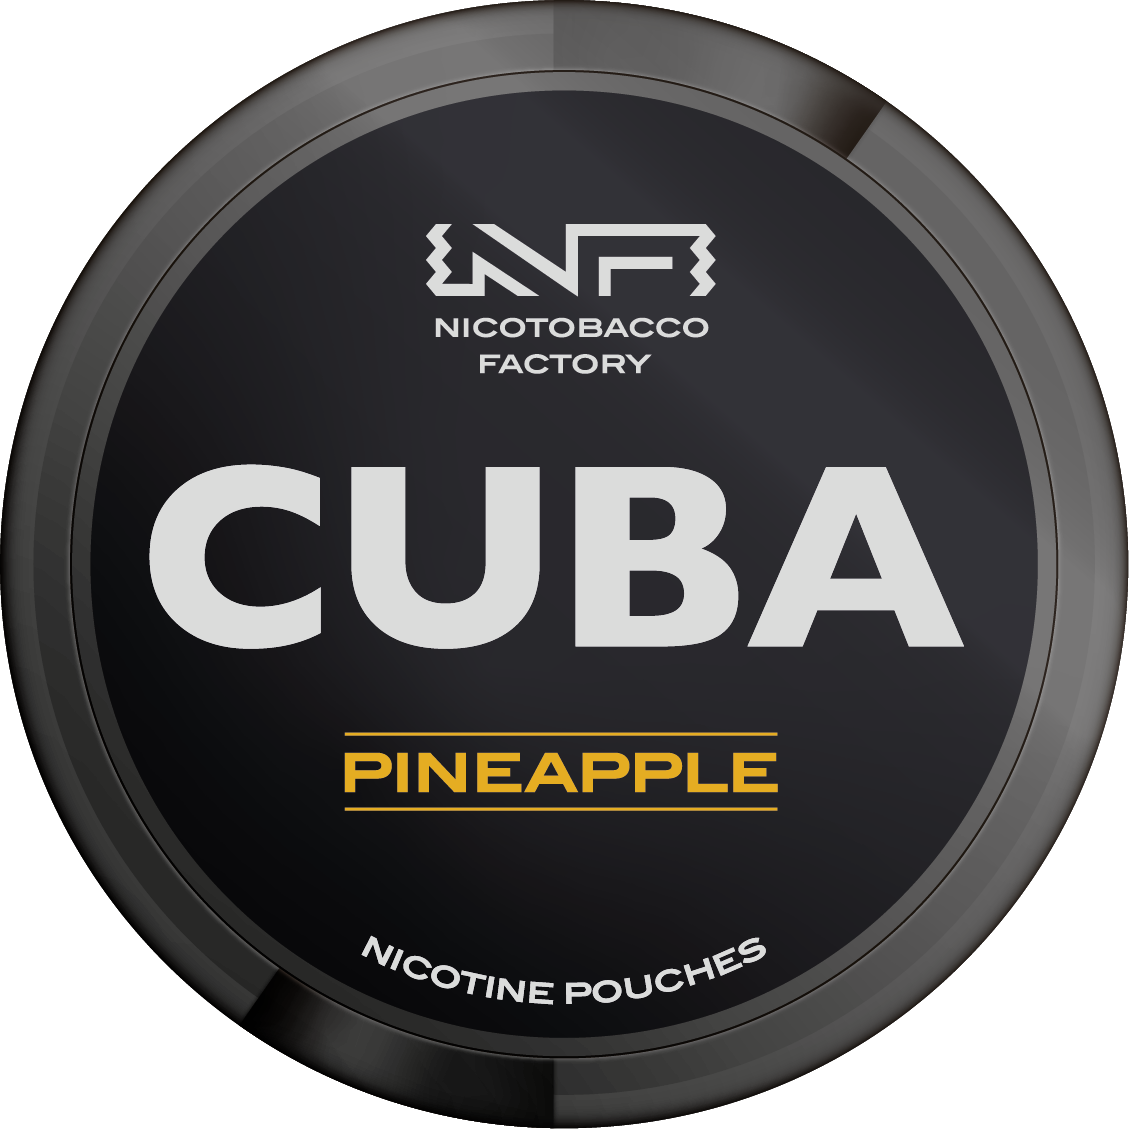 Black Pineapple Nicotine Pouches By Cuba